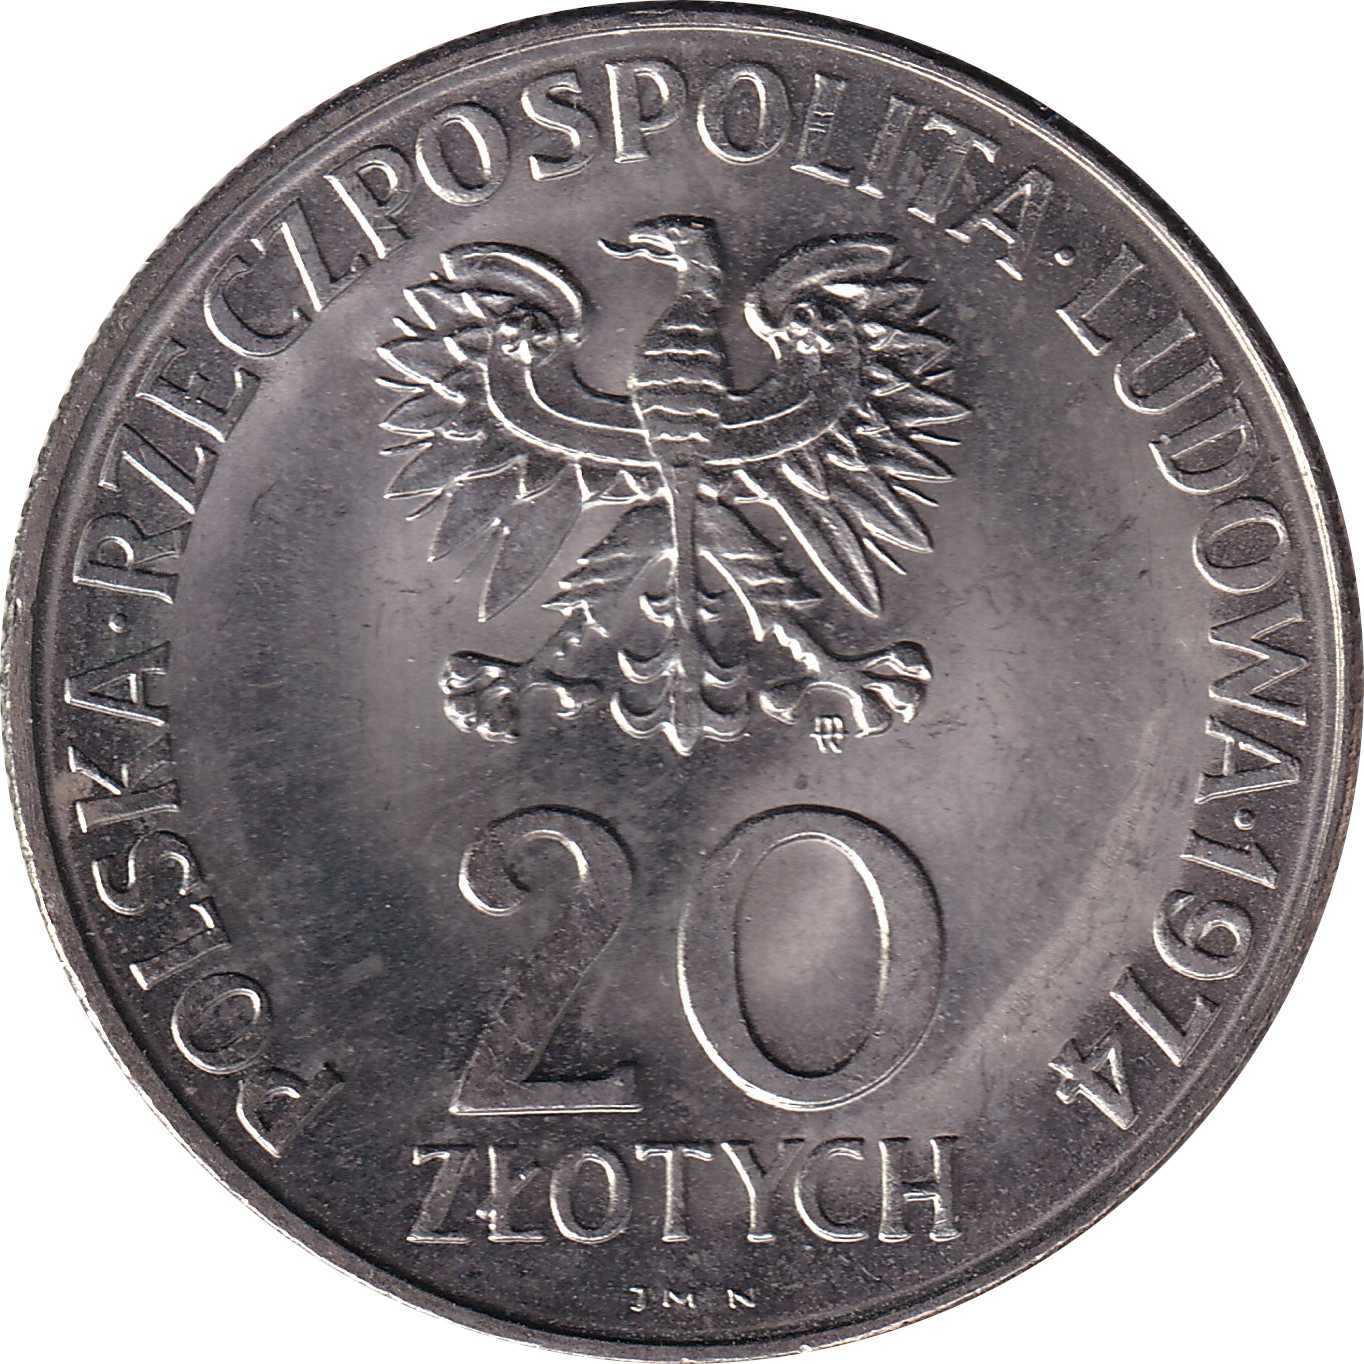 20 zlotych - Comcon - 25 years